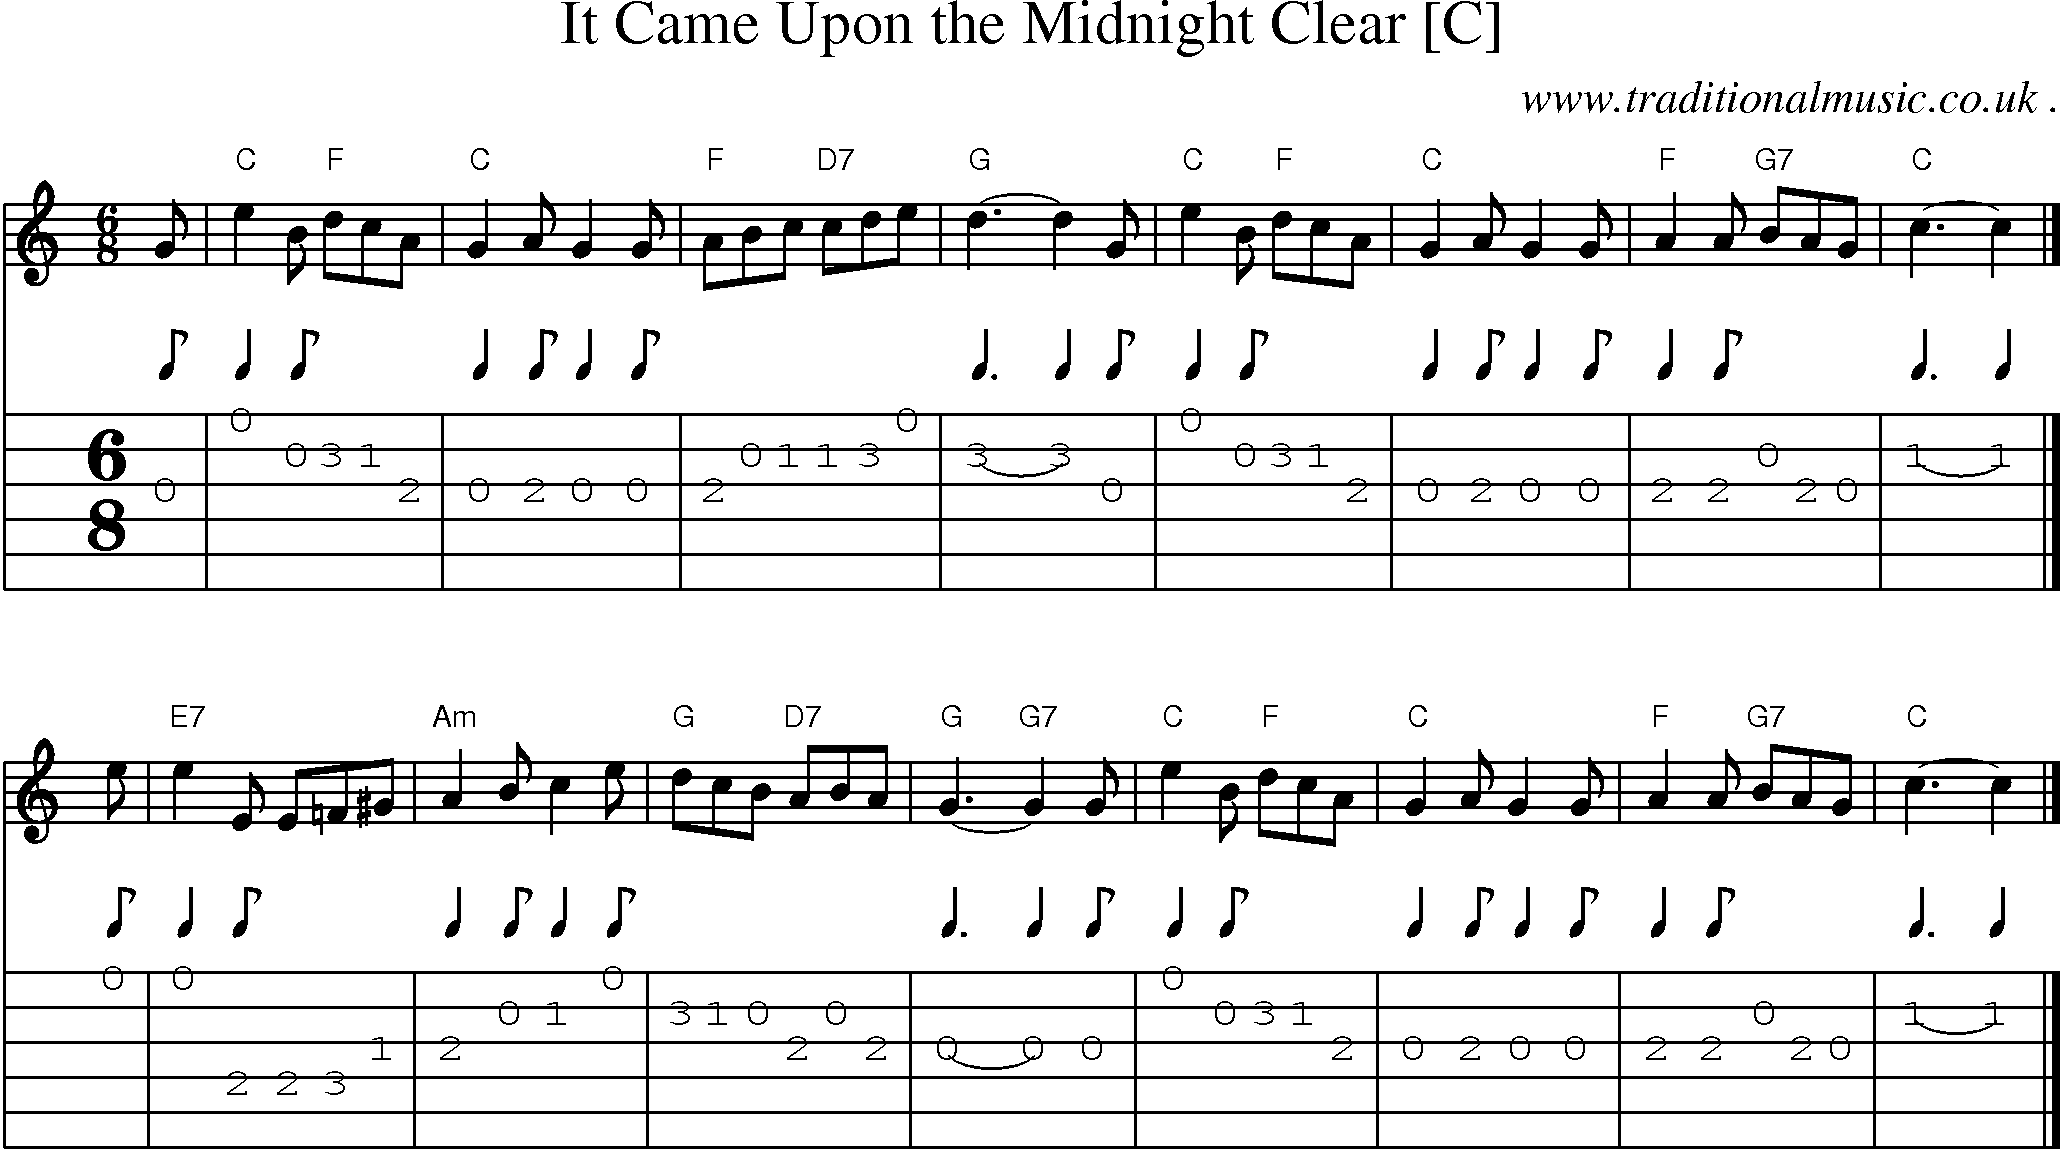 Sheet-music  score, Chords and Guitar Tabs for It Came Upon The Midnight Clear [c]